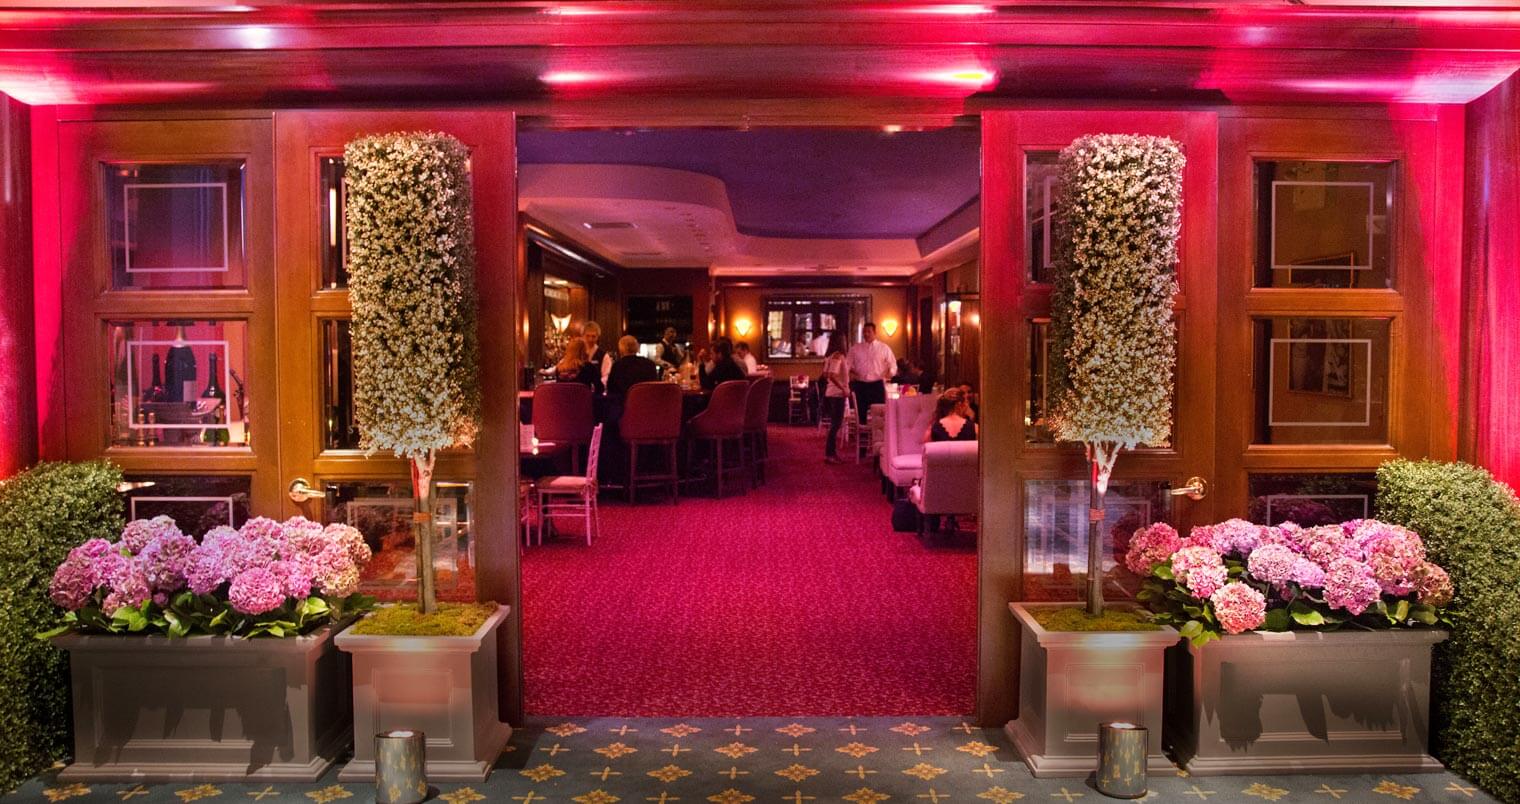 Waldorf Astoria NY Supports Breast Cancer Awareness Month, featured image